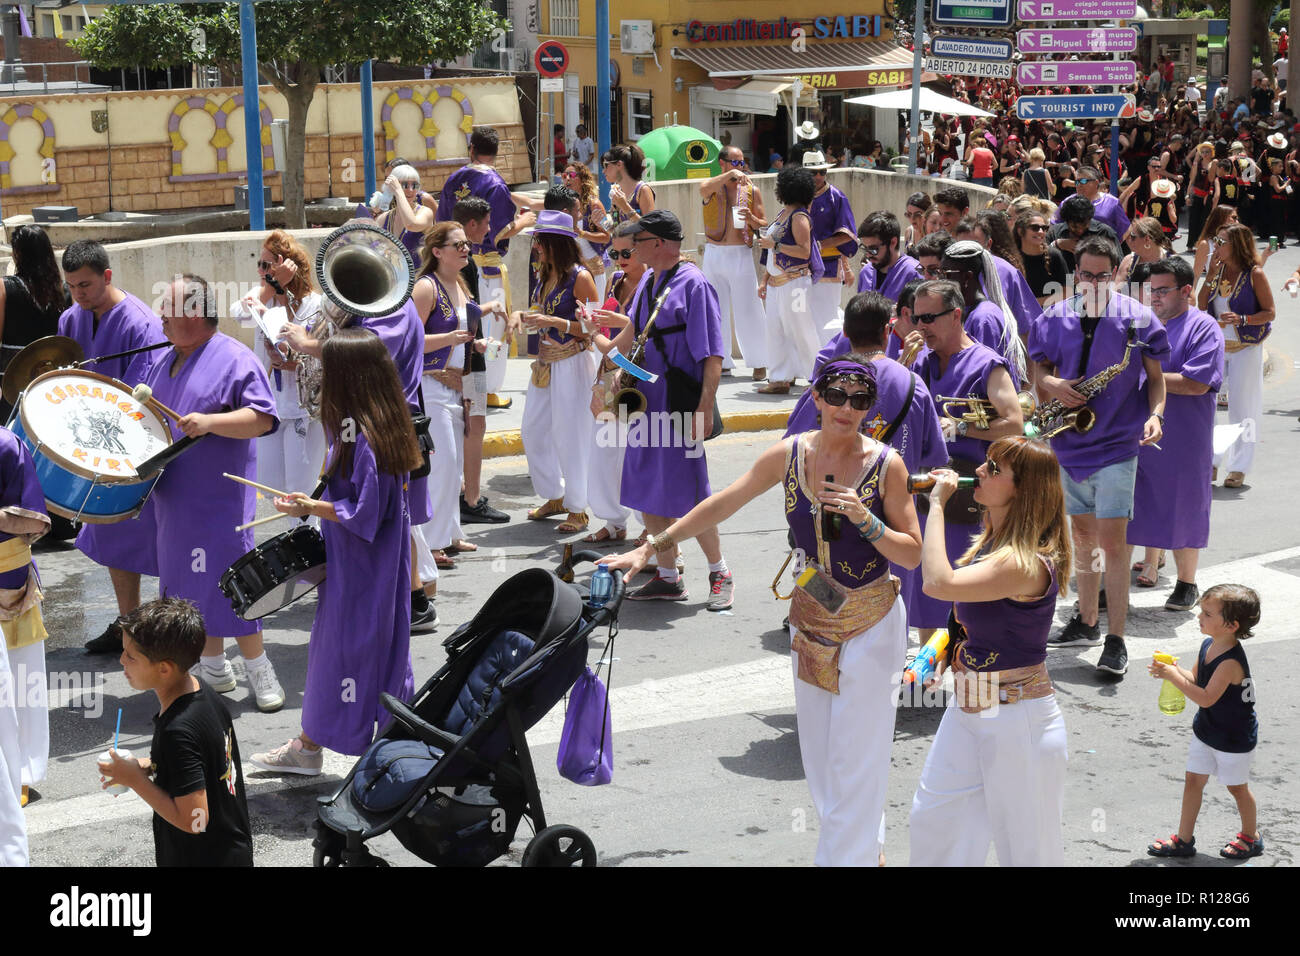 The Moros Almohabenos company band on a street parade during the Moors and Christians (Moros y Cristianos) historical reenactment in Orihuela, Spain Stock Photo